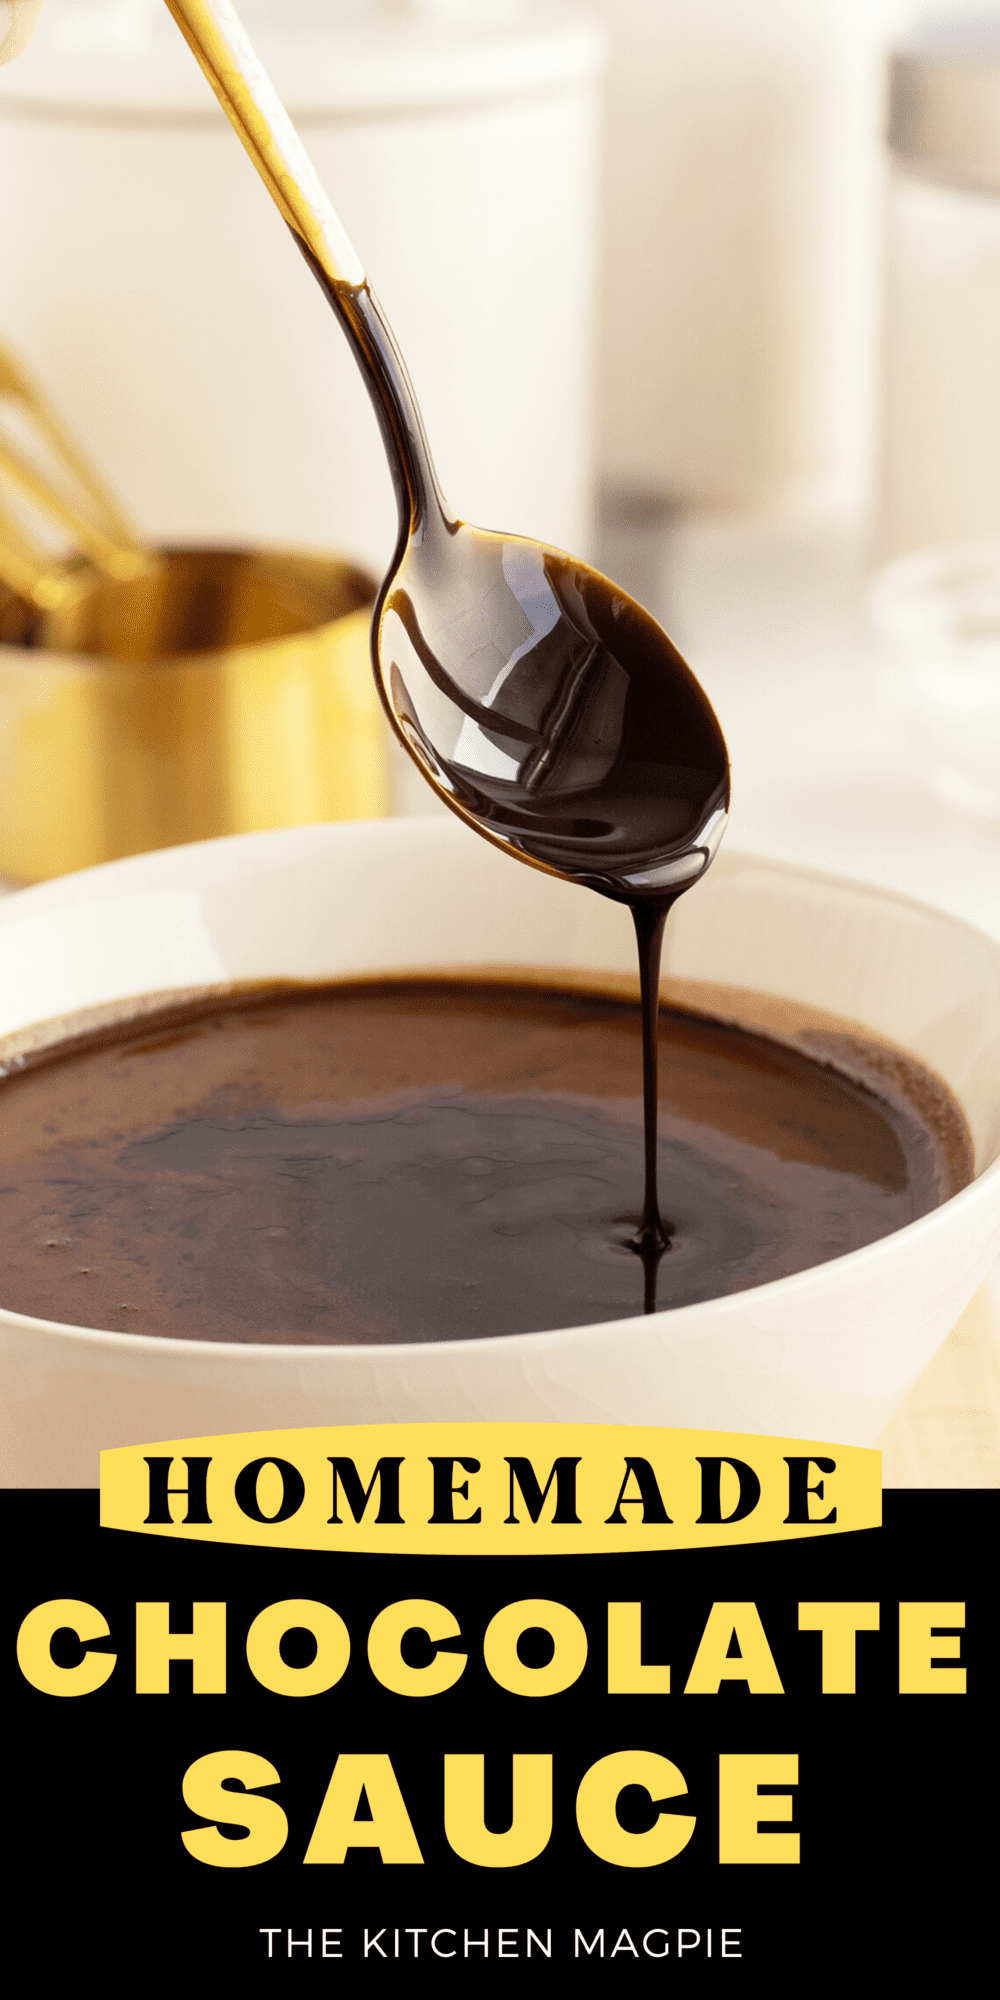 This chocolate sauce recipe makes a simple, pourable sauce that thickens as it cools and both smells, looks, and tastes like liquid chocolate.